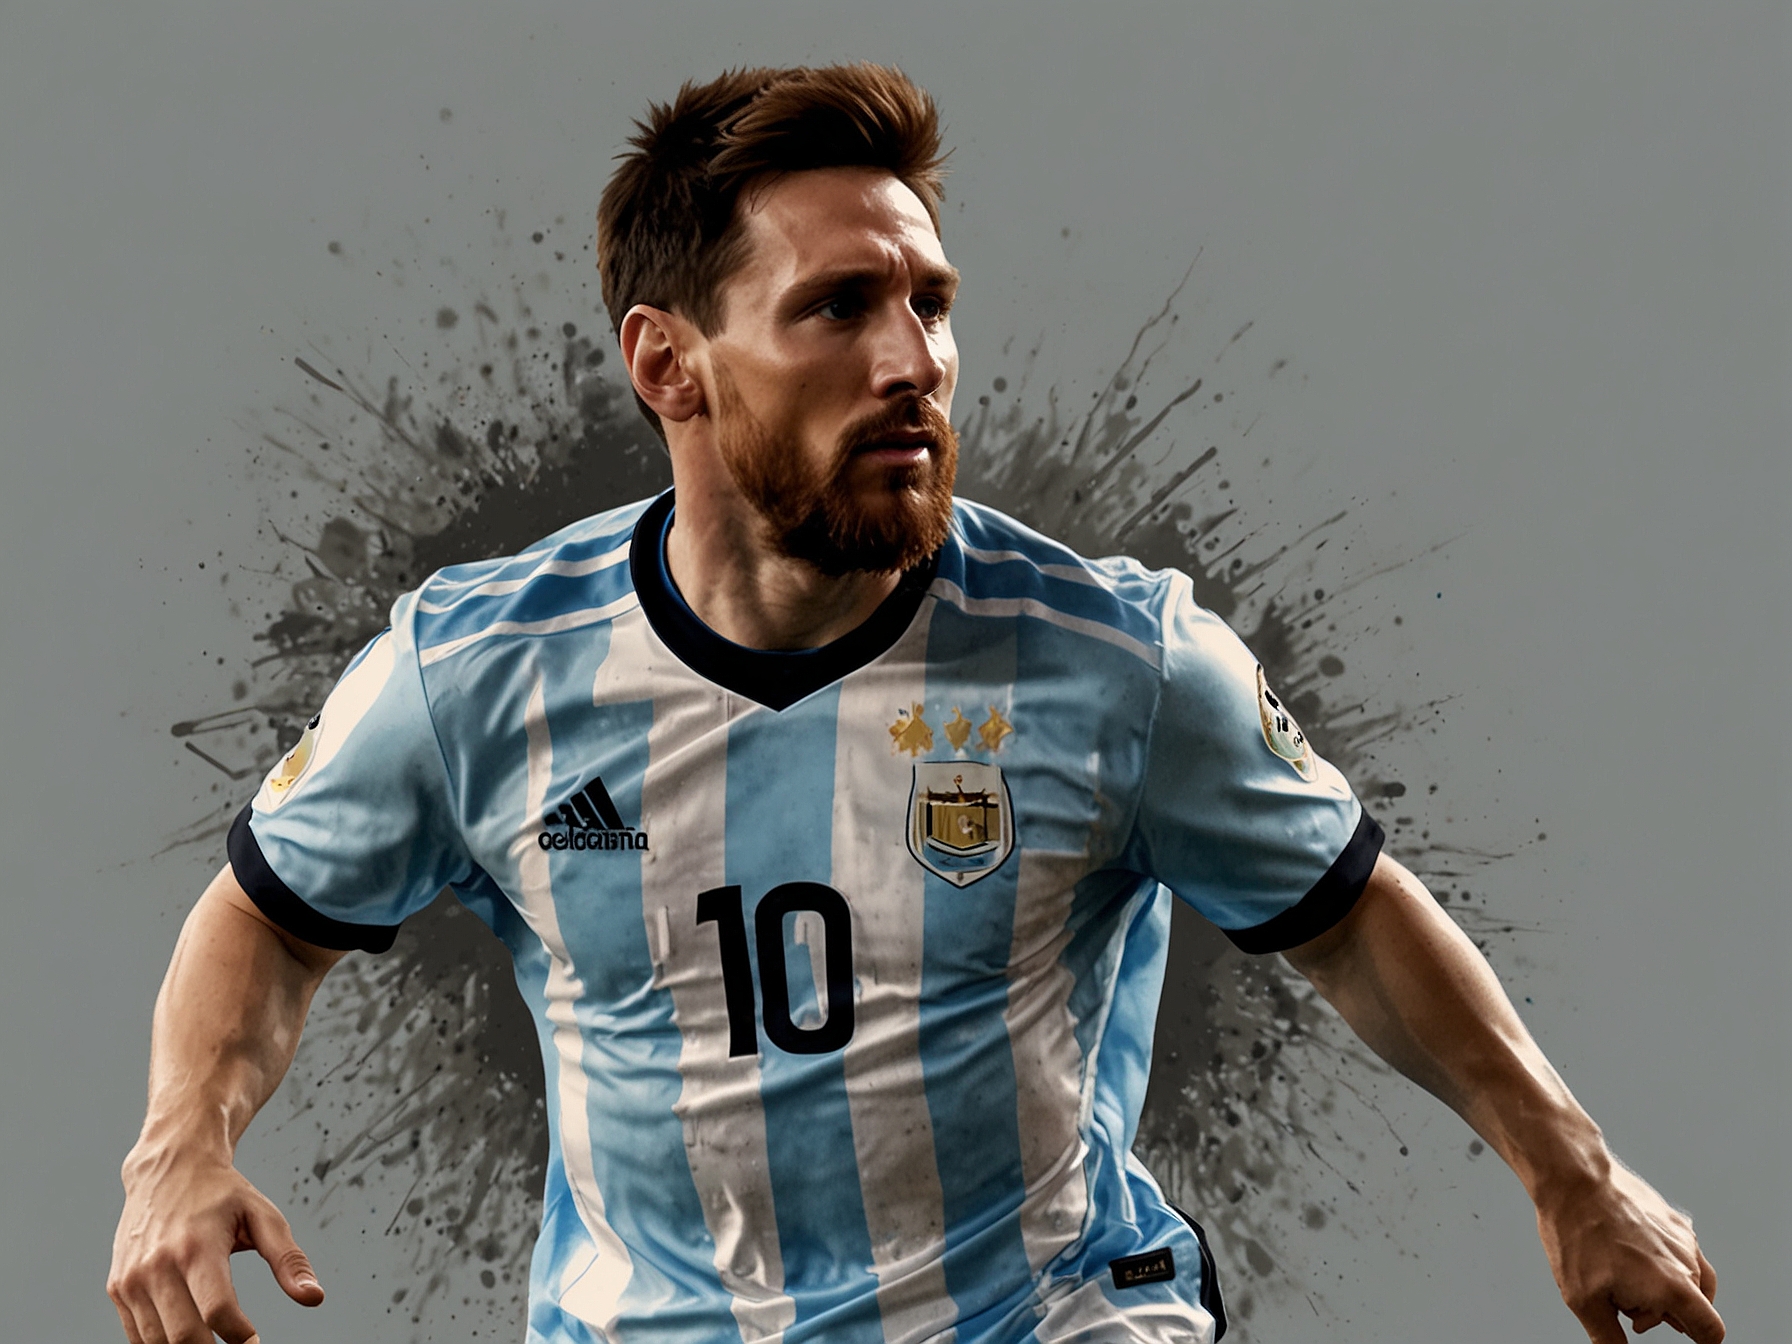 Lionel Messi in action on the football field, showcasing his unmatched skills and leadership for the Argentina national team.